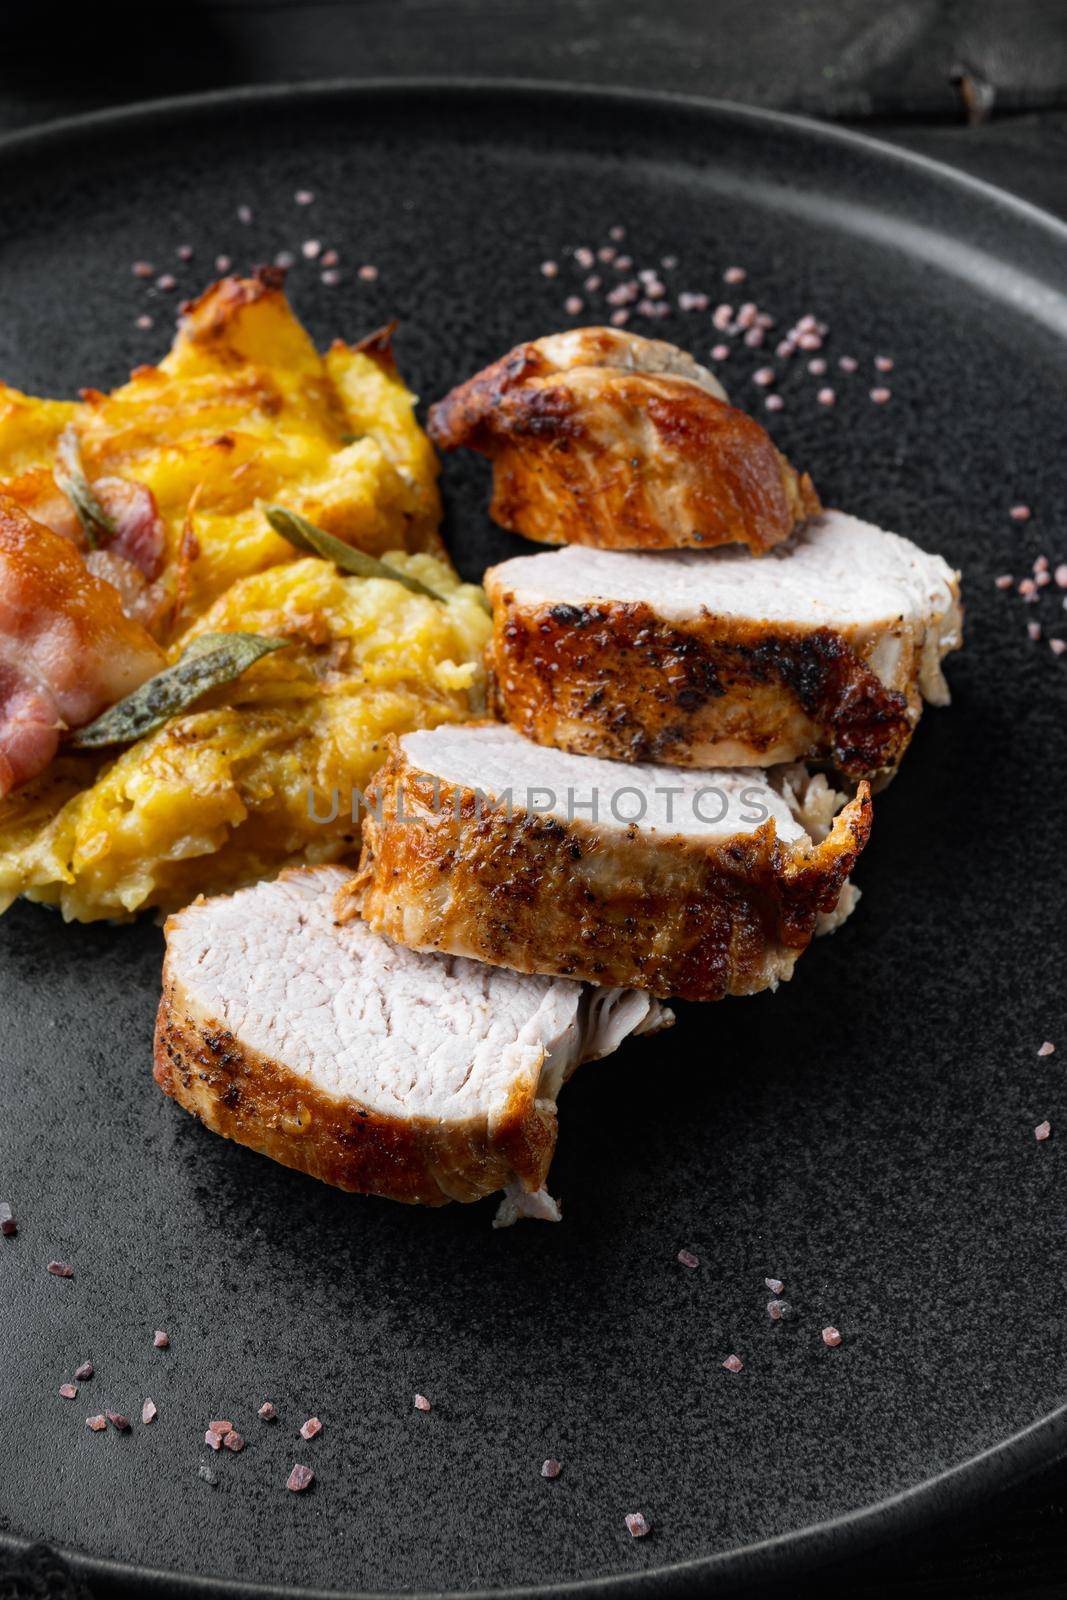 Roasted pork loin with mash potatoe gratin, sage and prosciutto set, on plate dish, on black wooden table background